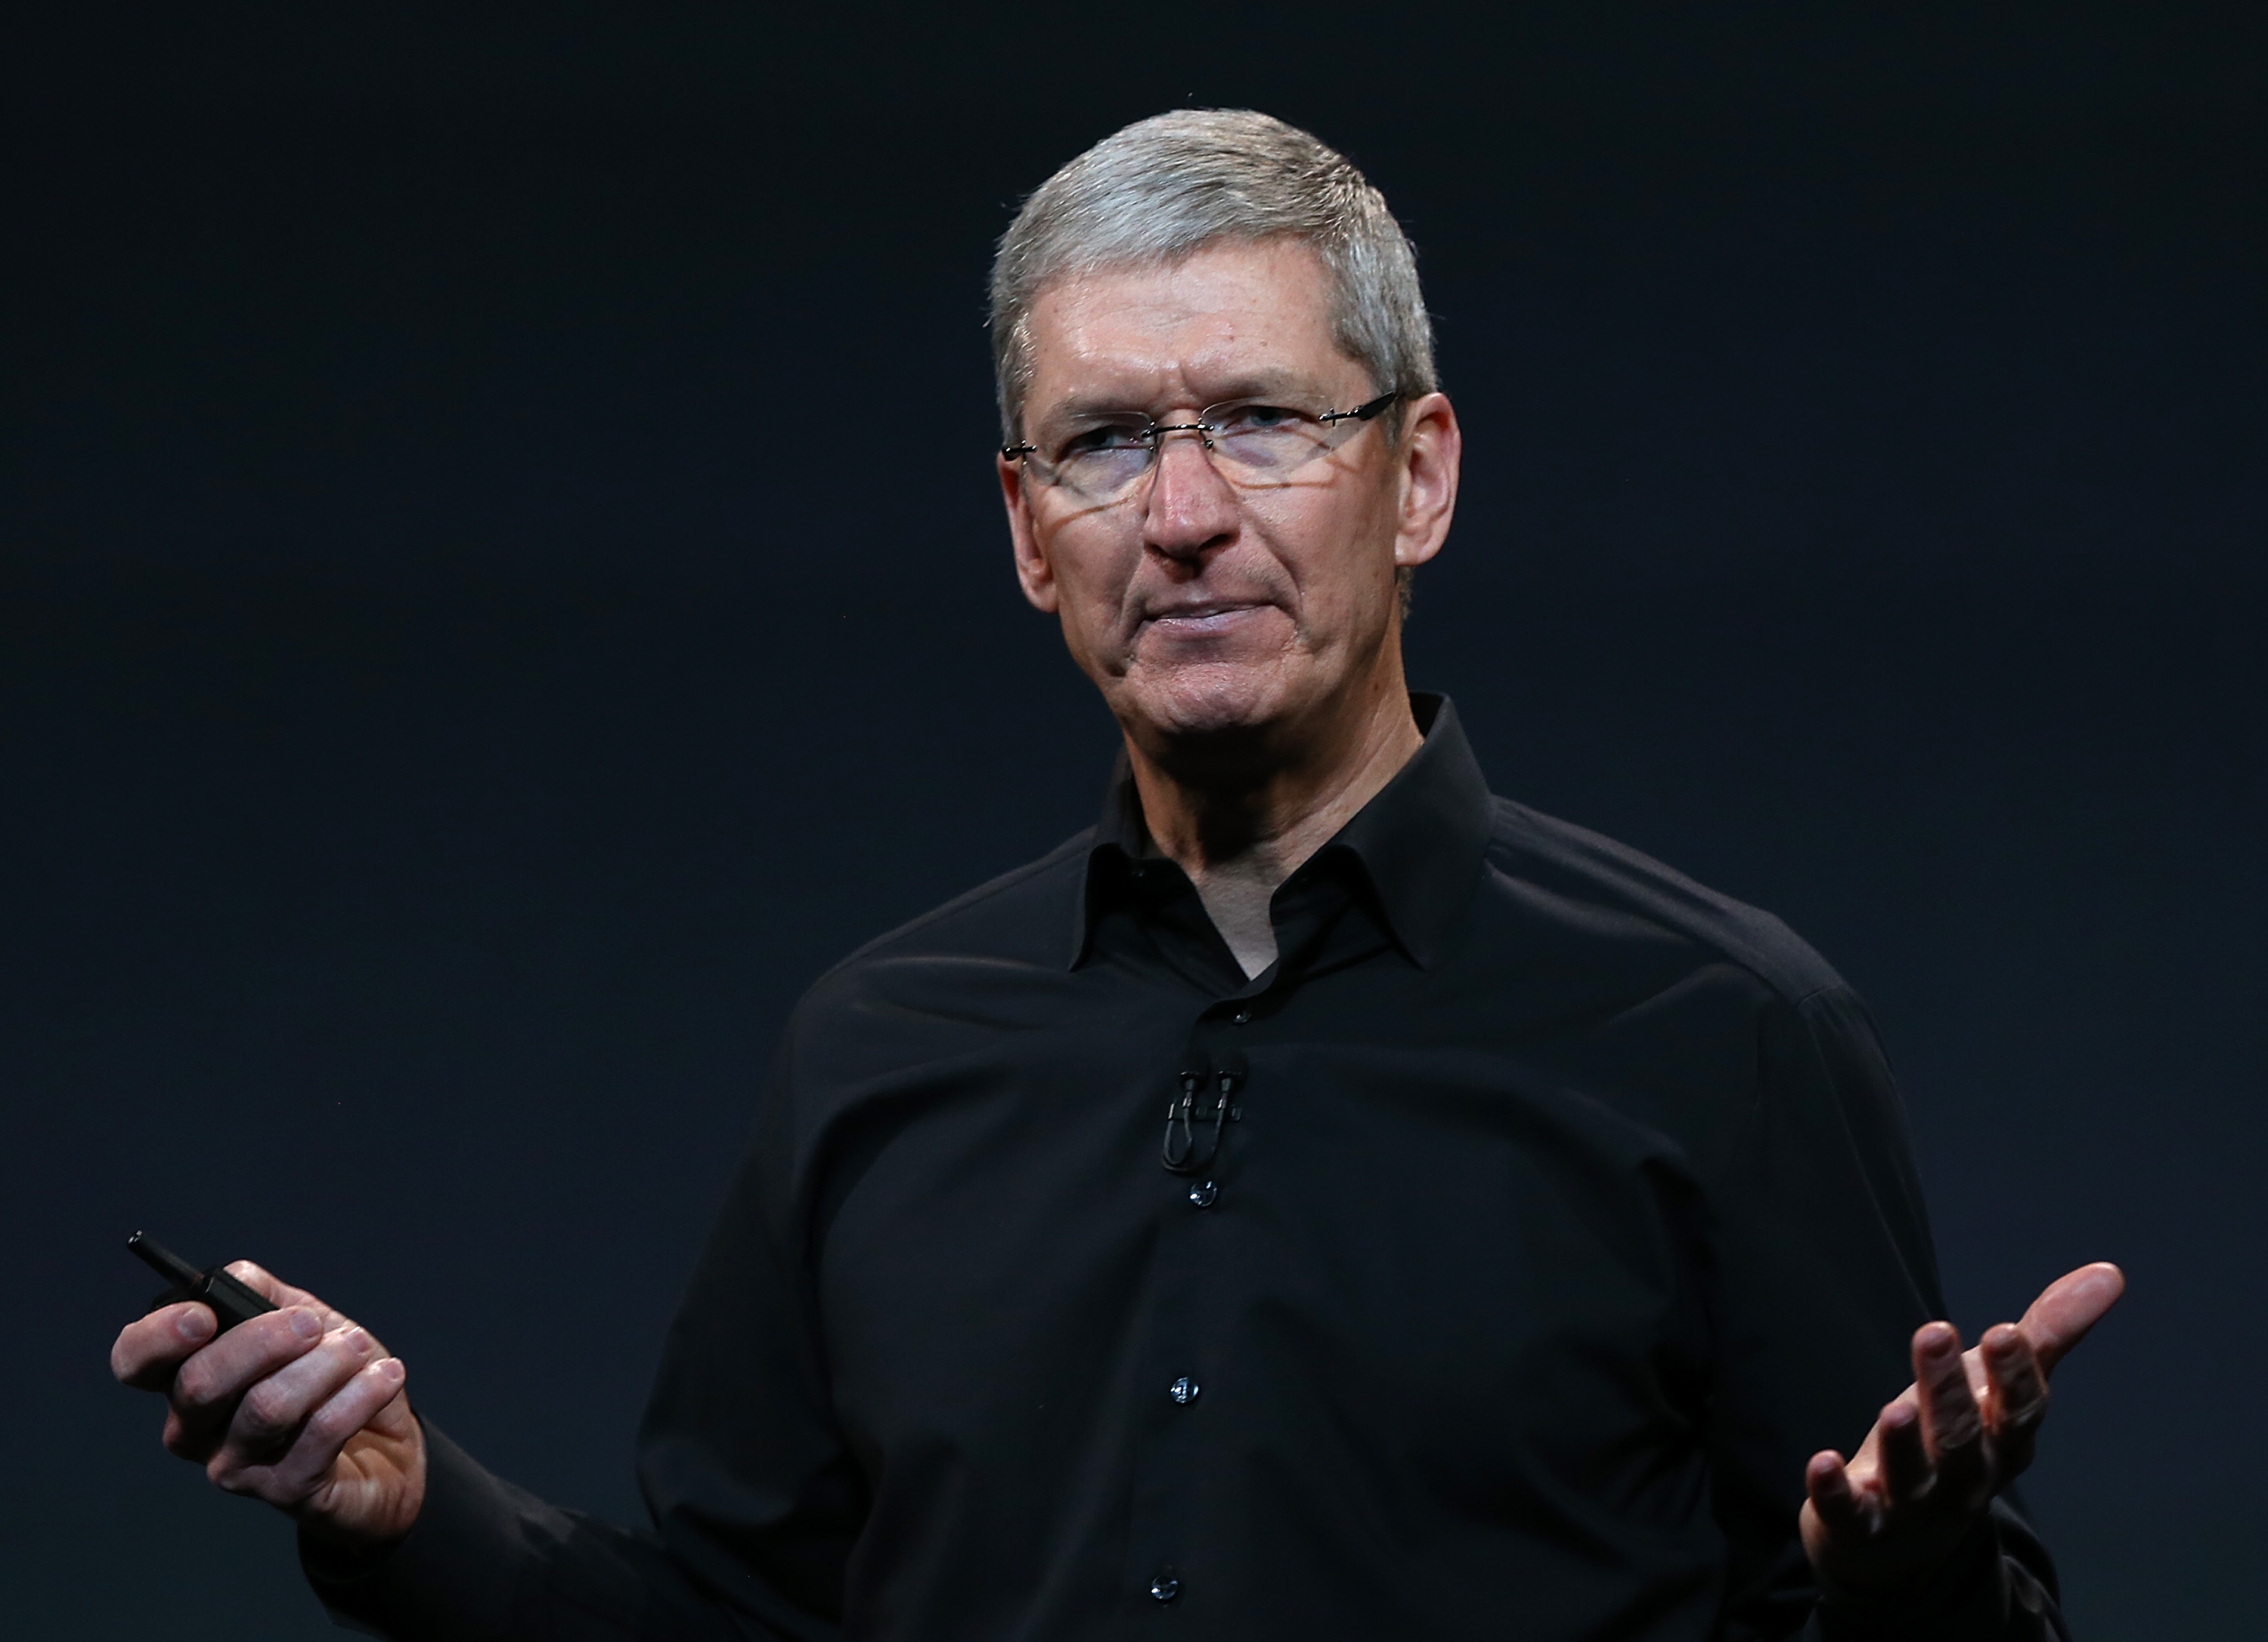 Apple CEO Tim Cook speaks during an Apple announcement at the Yerba Buena Center for the Arts on October 22, 2013 in San Francisco, California. (Justin Sullivan&mdash;Getty Images)